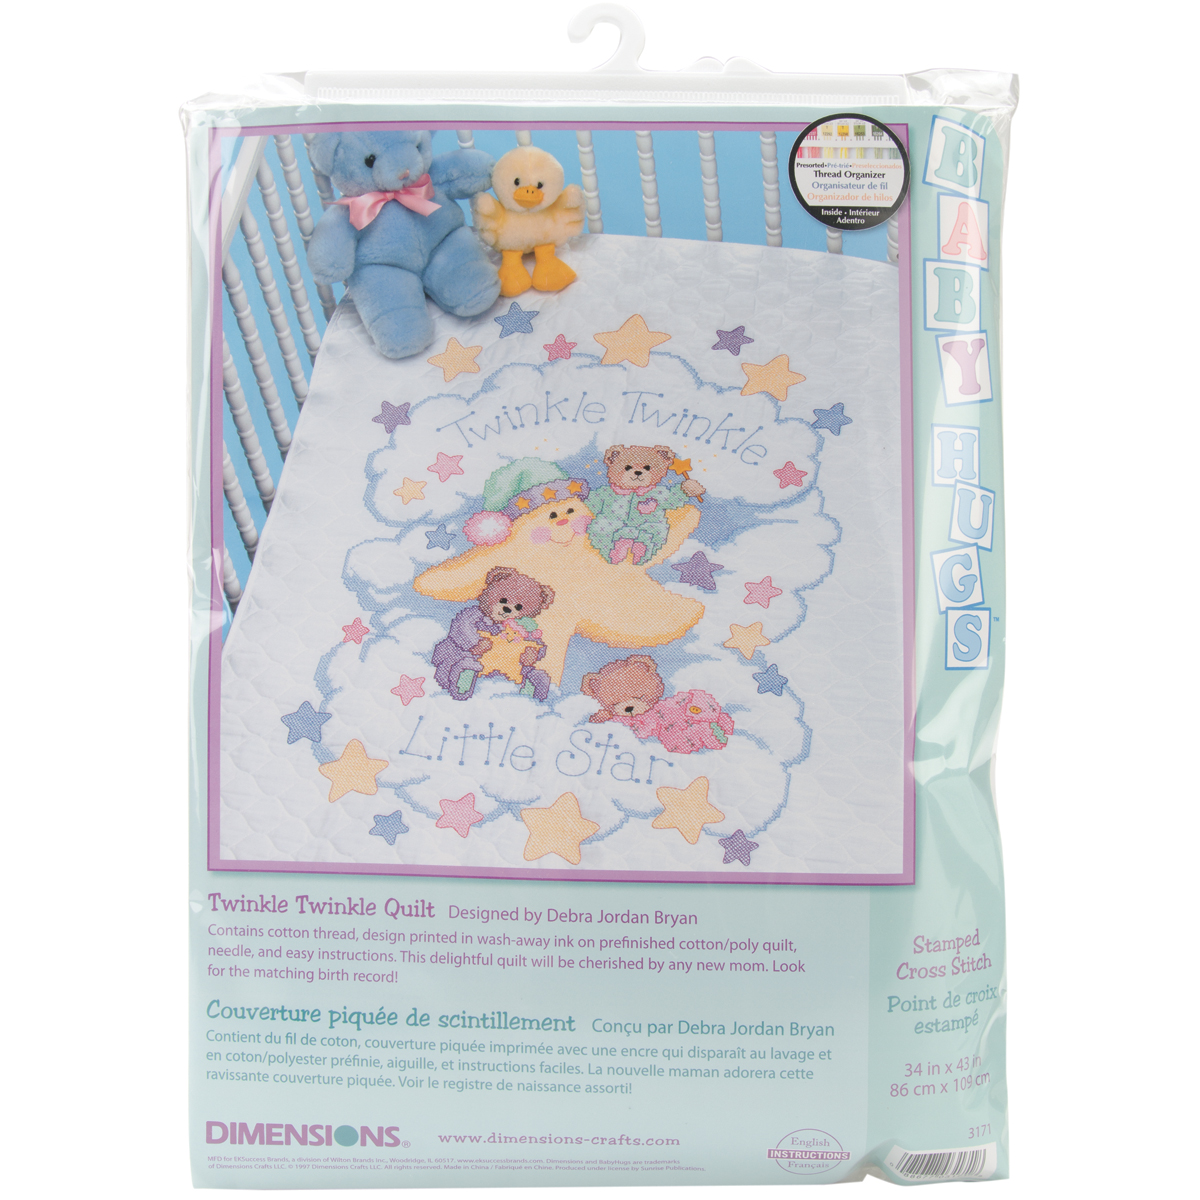 Dimensions Stamped Cross Stitch Baby Quilt Kit Twinkle Little Star Bears 34 X 43 For Sale Online EBay